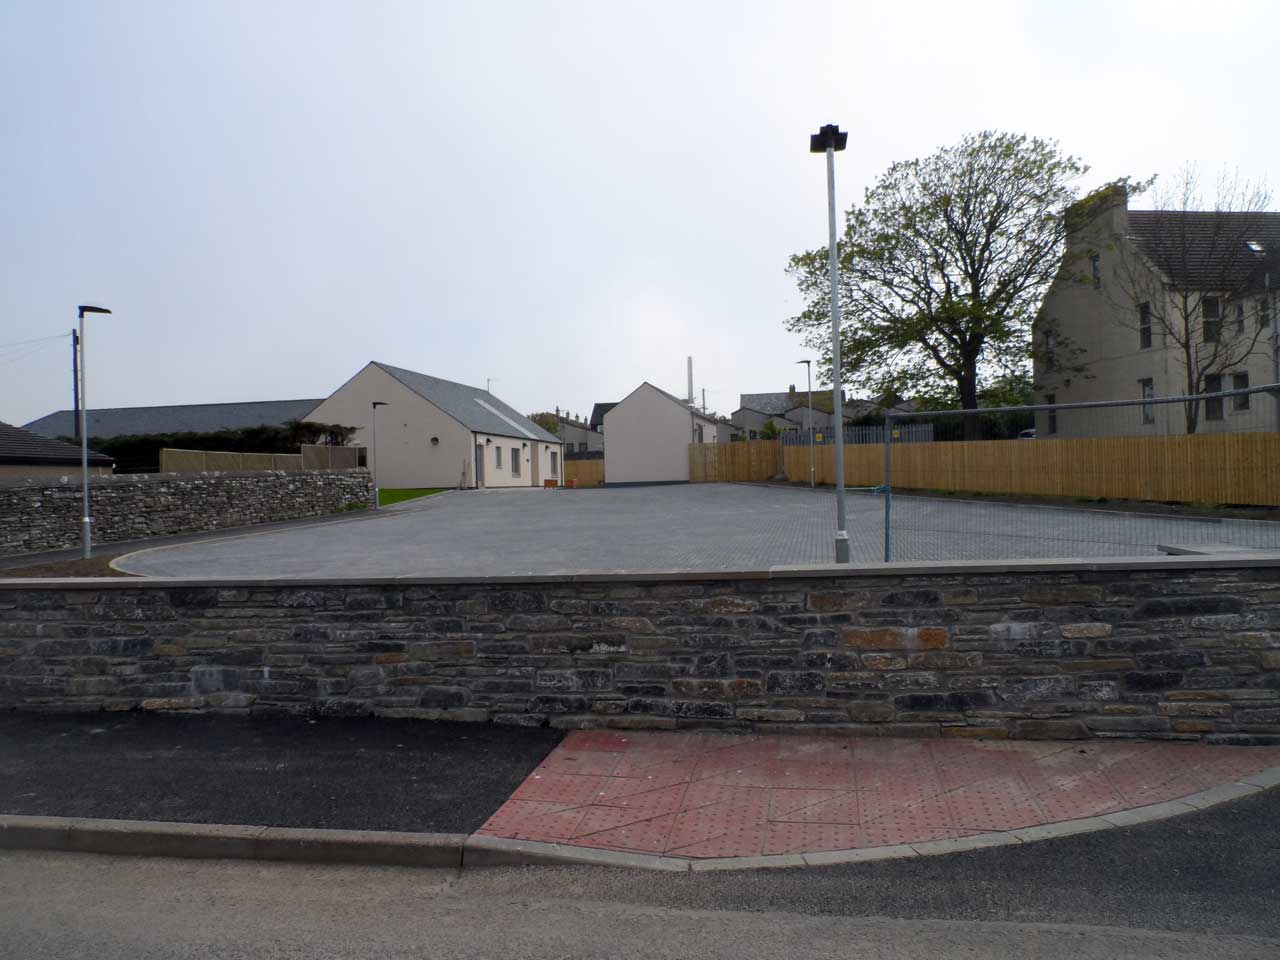 Photo: New Children's Home In Wick 31 May 2014